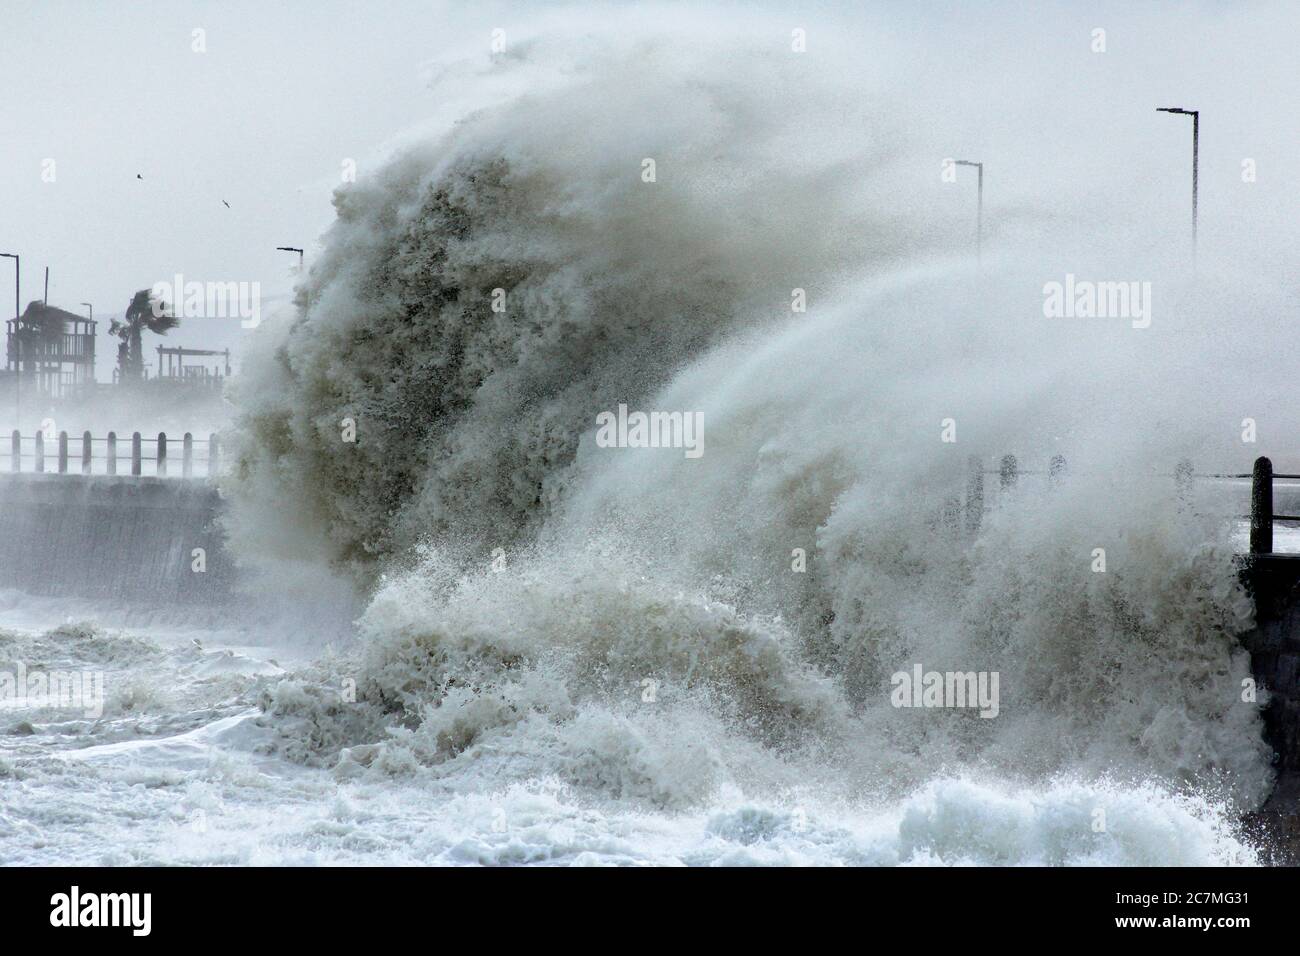 Massive storm waves battering the seawall in Cape Town during an intense winter storm. Stock Photo